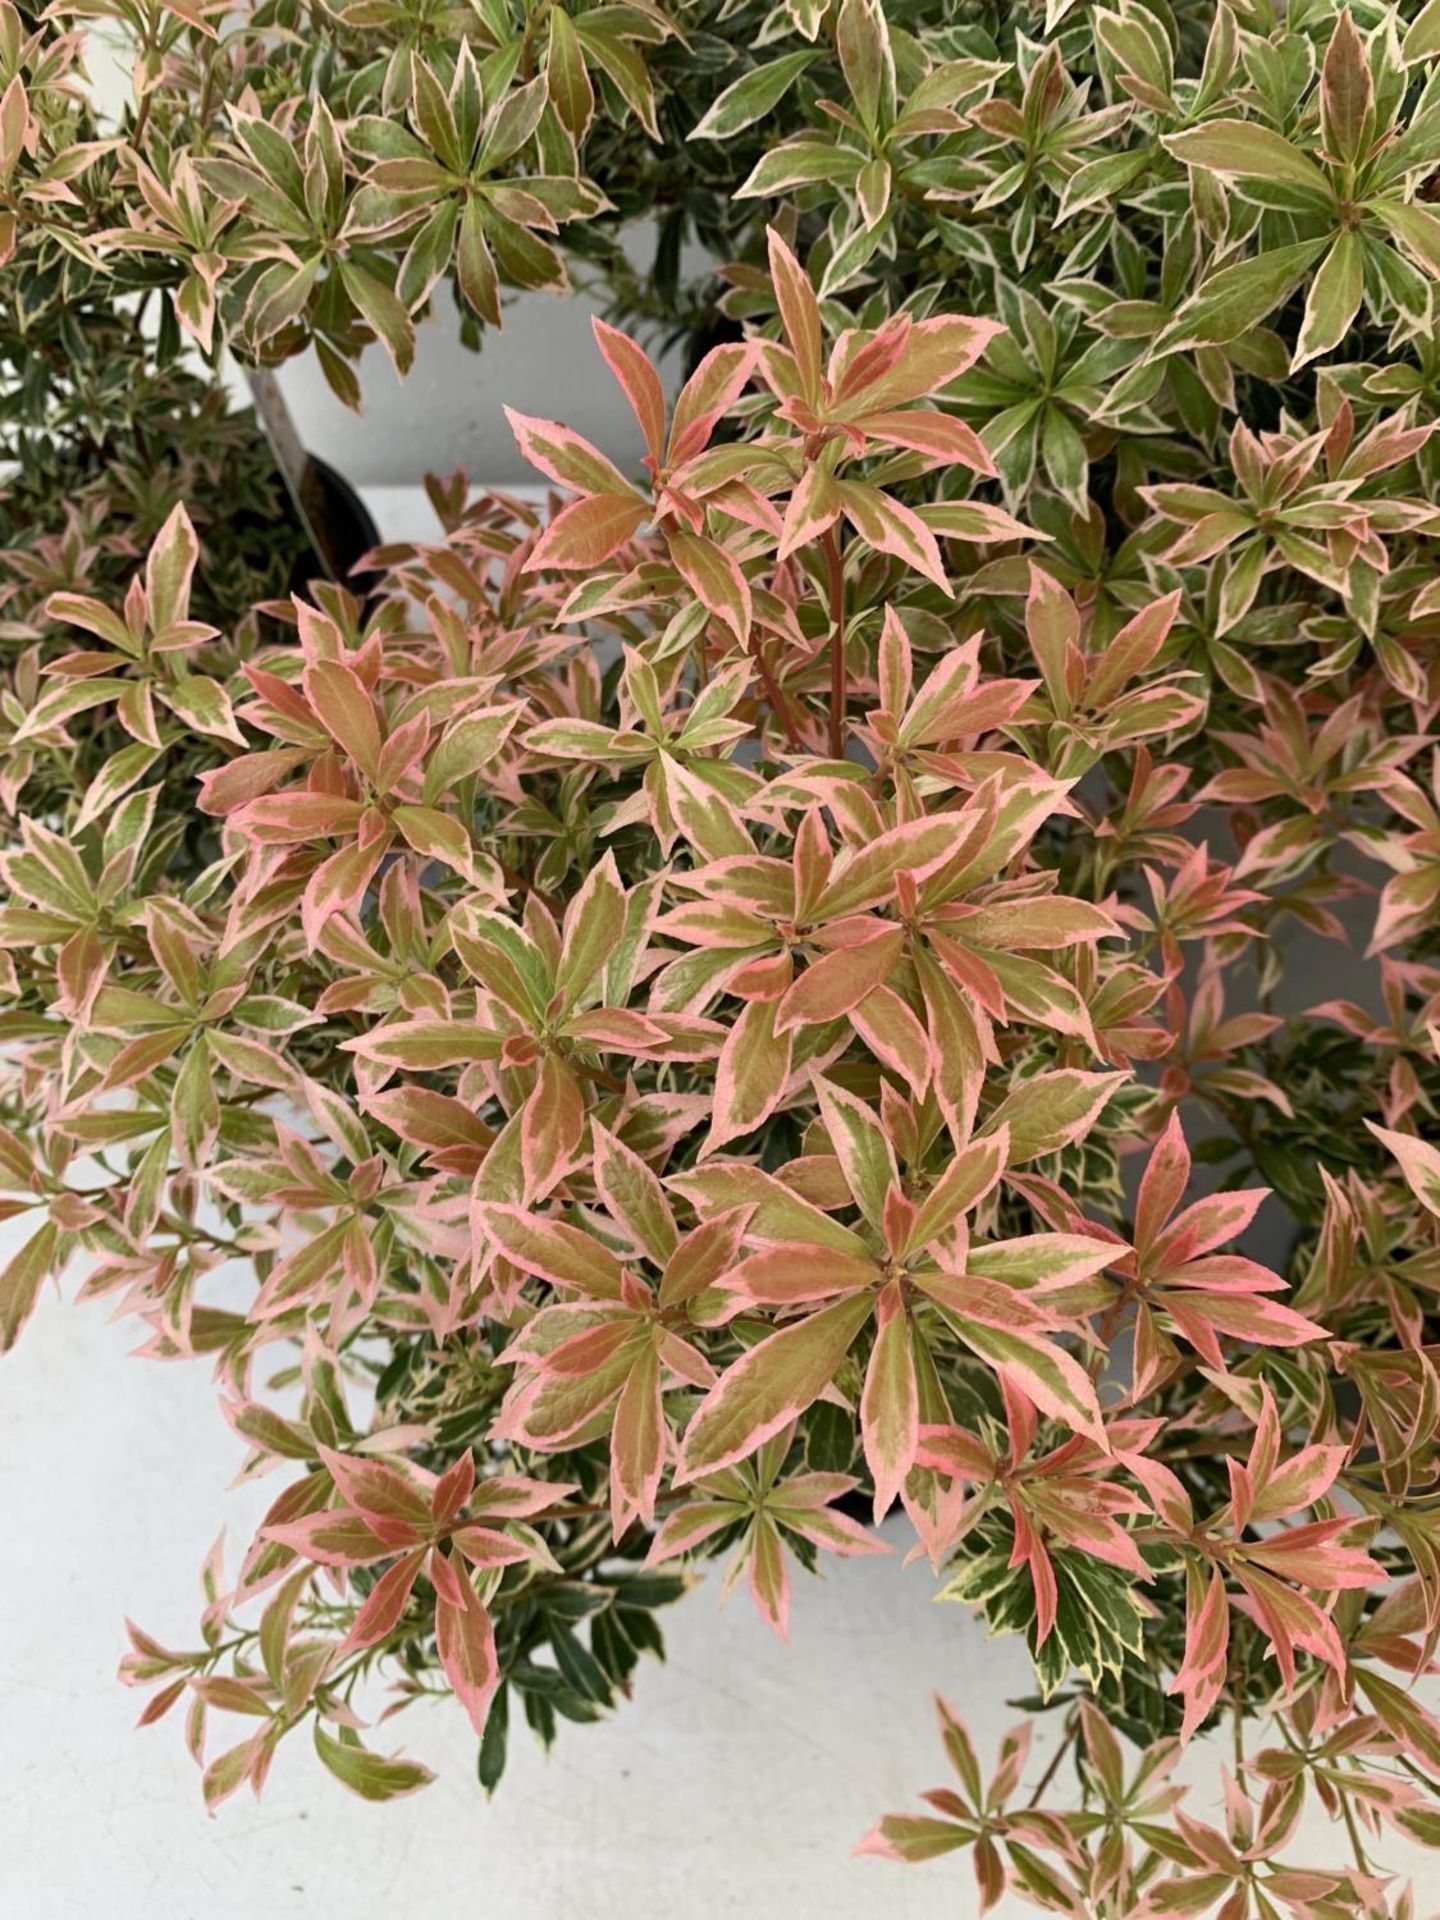 SEVEN PIERIS LITTLE HEATH 45CM TALL IN 2 LTR POTS TO BE SOLD FOR THE SEVEN PLUS VAT - Image 5 of 13